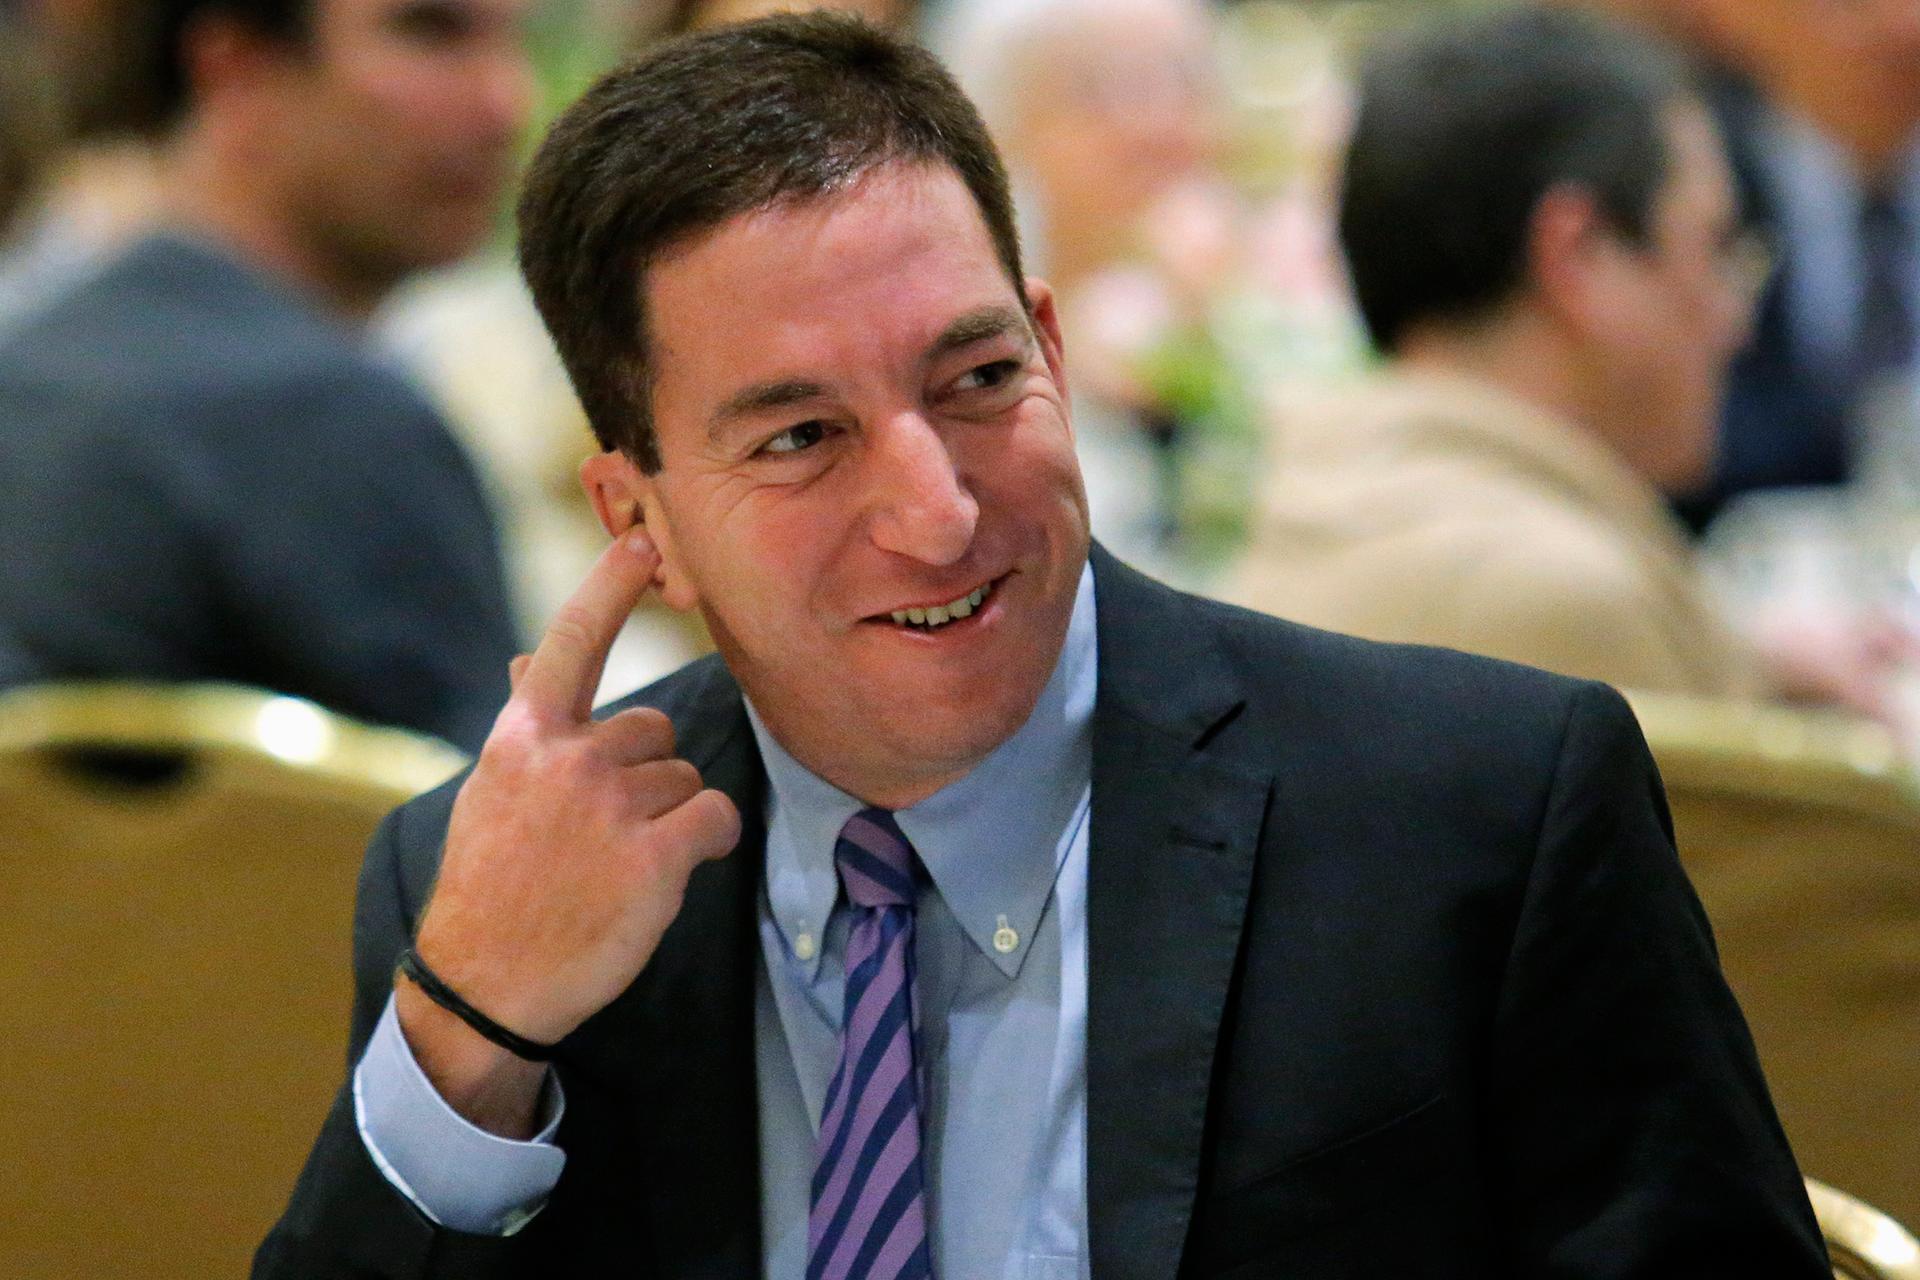 Glenn Greenwald attends the George Polk Awards in New York, April 11, 2014. Greenwald and Laura Poitras, the U.S. journalists who reported on spy agency analyst Edward Snowden's leaks exposing mass government surveillance, returned to the United States on